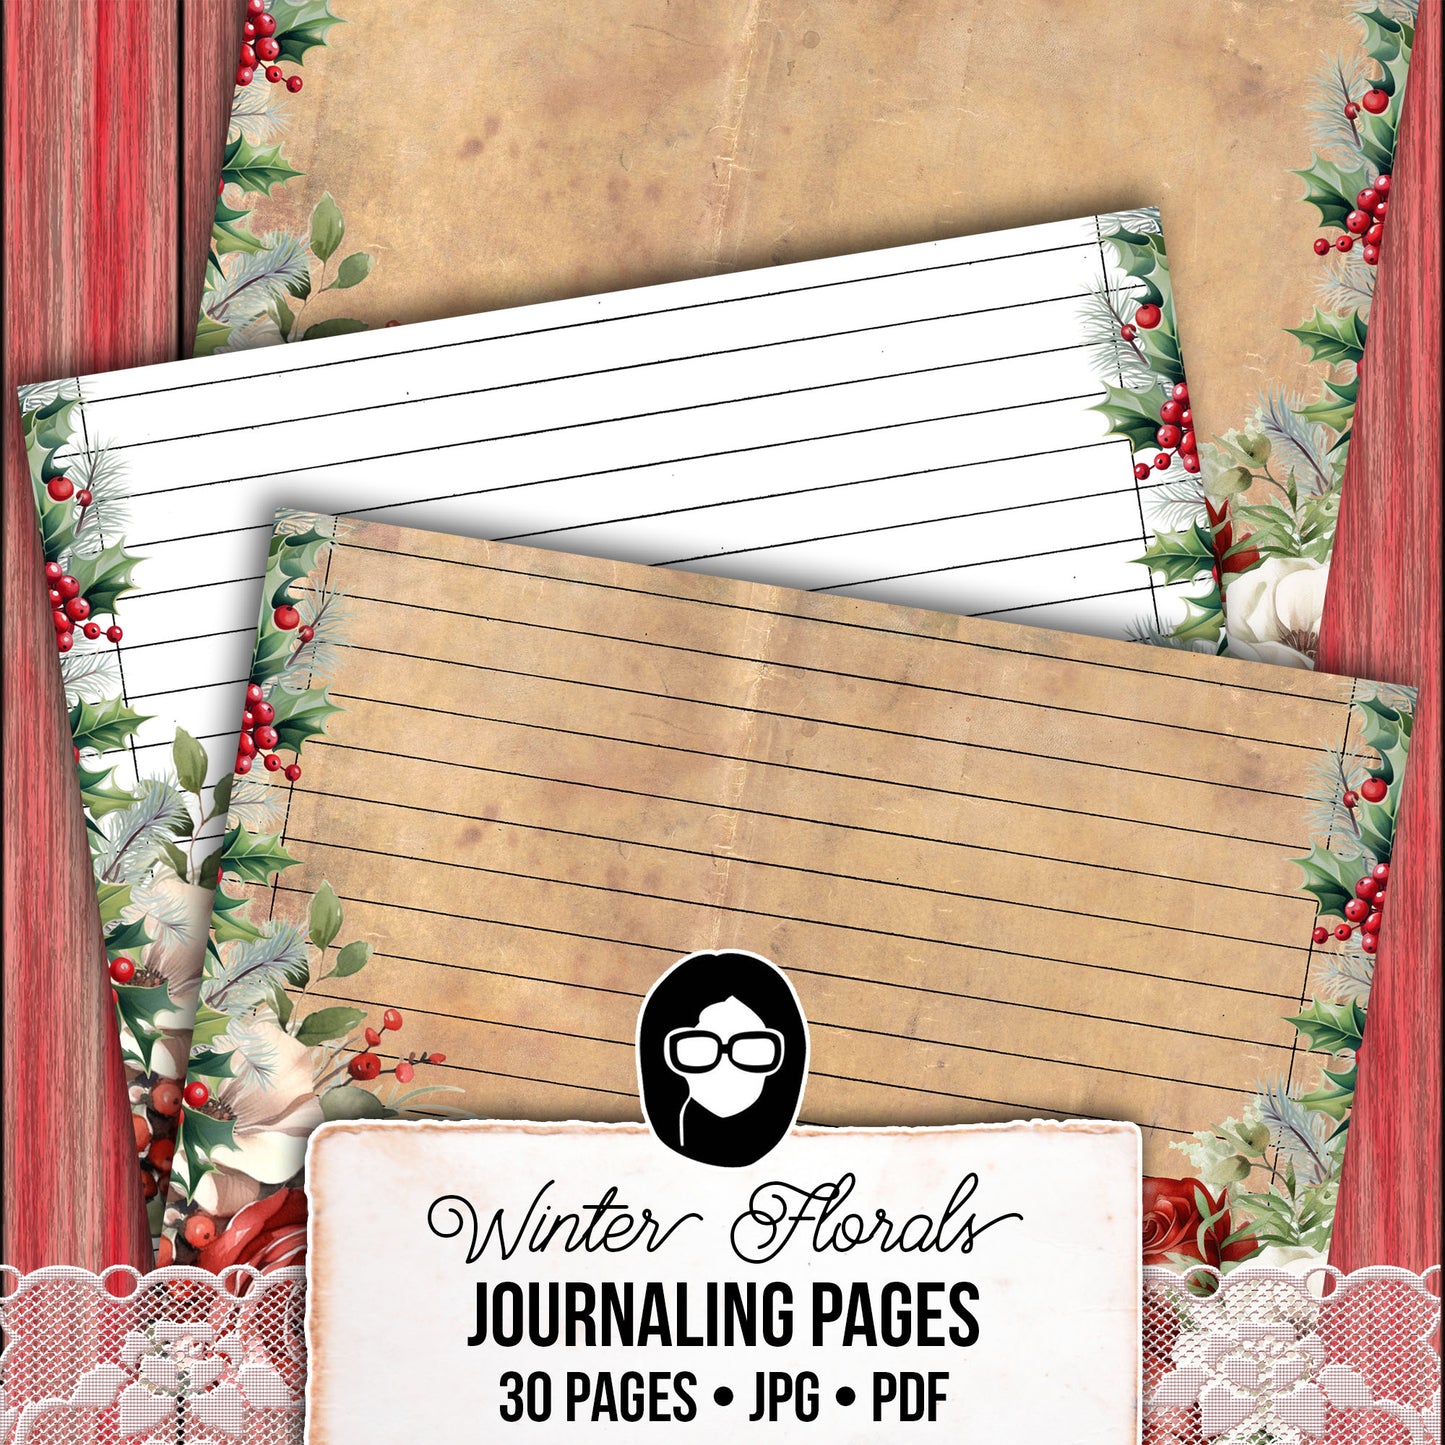 Christmas Journal Pages, Lined Journaling Papers -30pg Digital Download- Holiday Printable Paper, Christmas Flowers, Red Holly Berries,Green